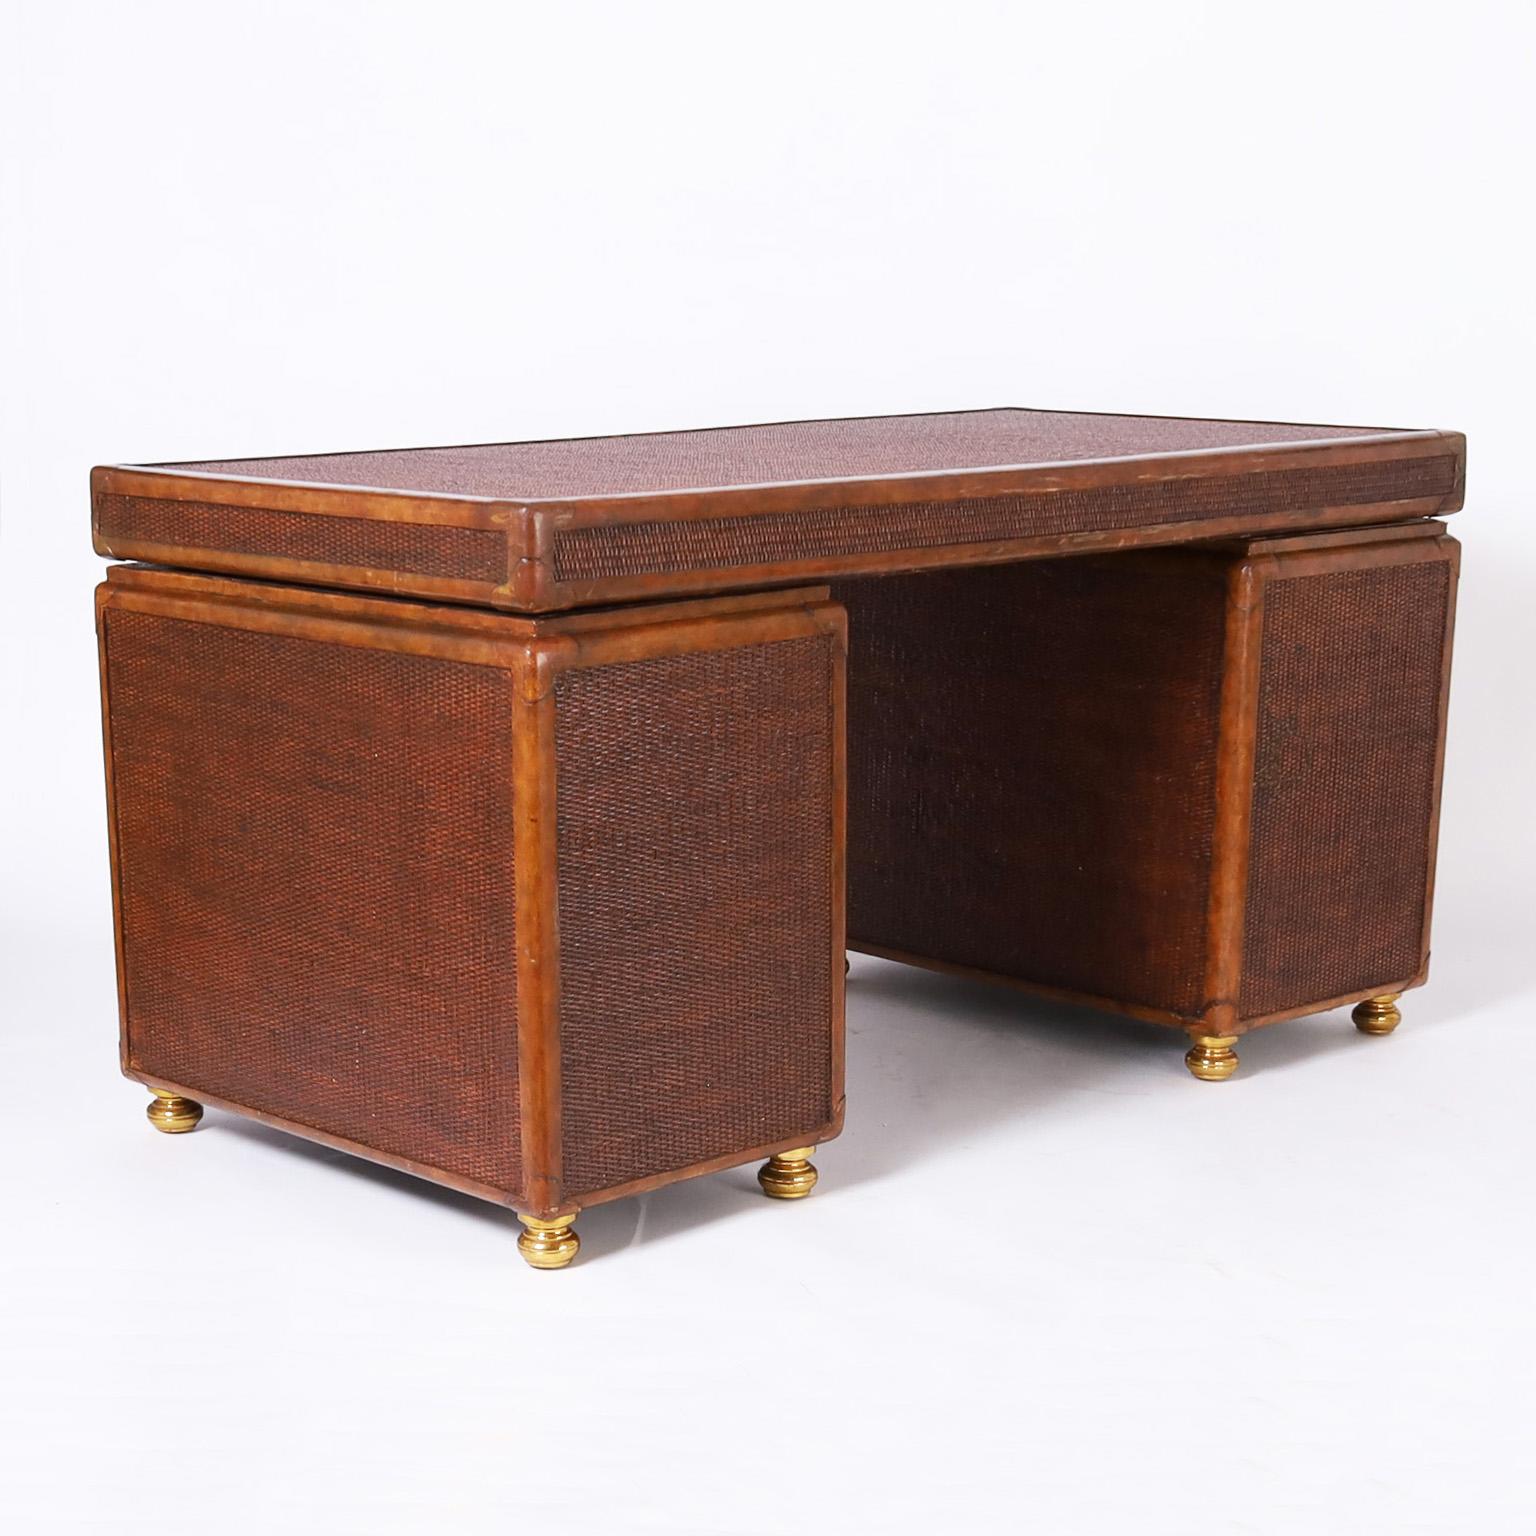 Handsome British colonial style seven drawer desk crafted in mahogany with bold grasscloth panels all around featuring leather luggage style hardware and turned brass legs. Signed Maitland Smith in a drawer.